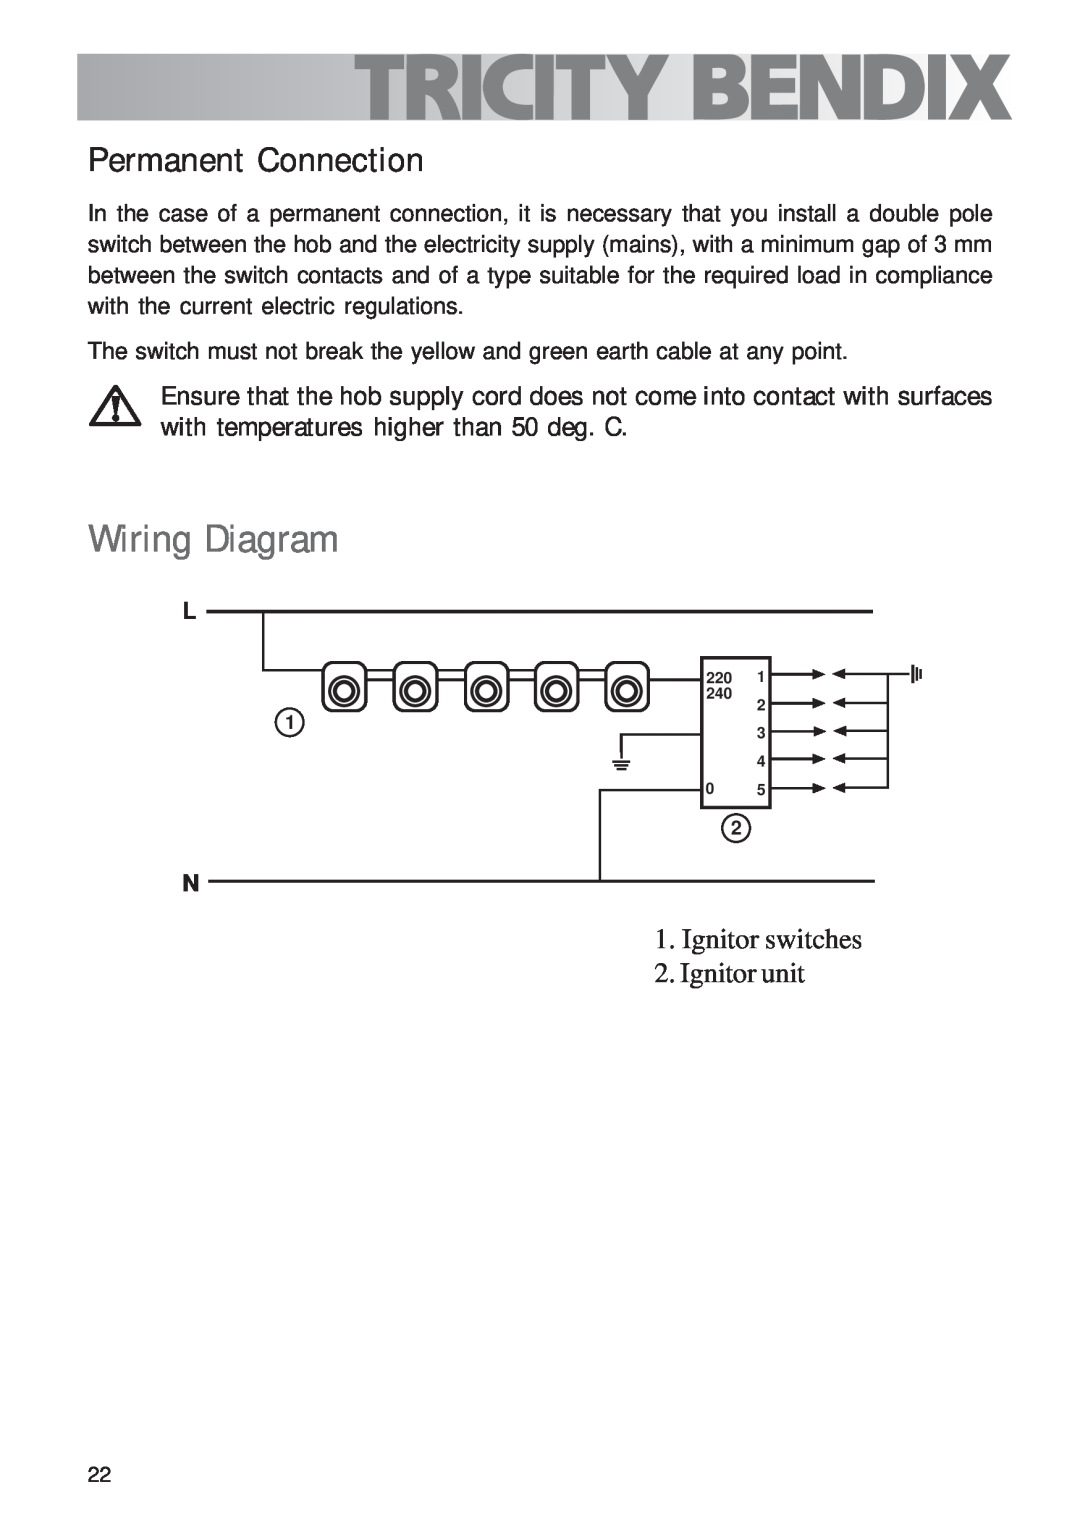 Tricity Bendix TBG700 user manual Wiring Diagram, Permanent Connection, Ignitor switches 2.Ignitor unit 